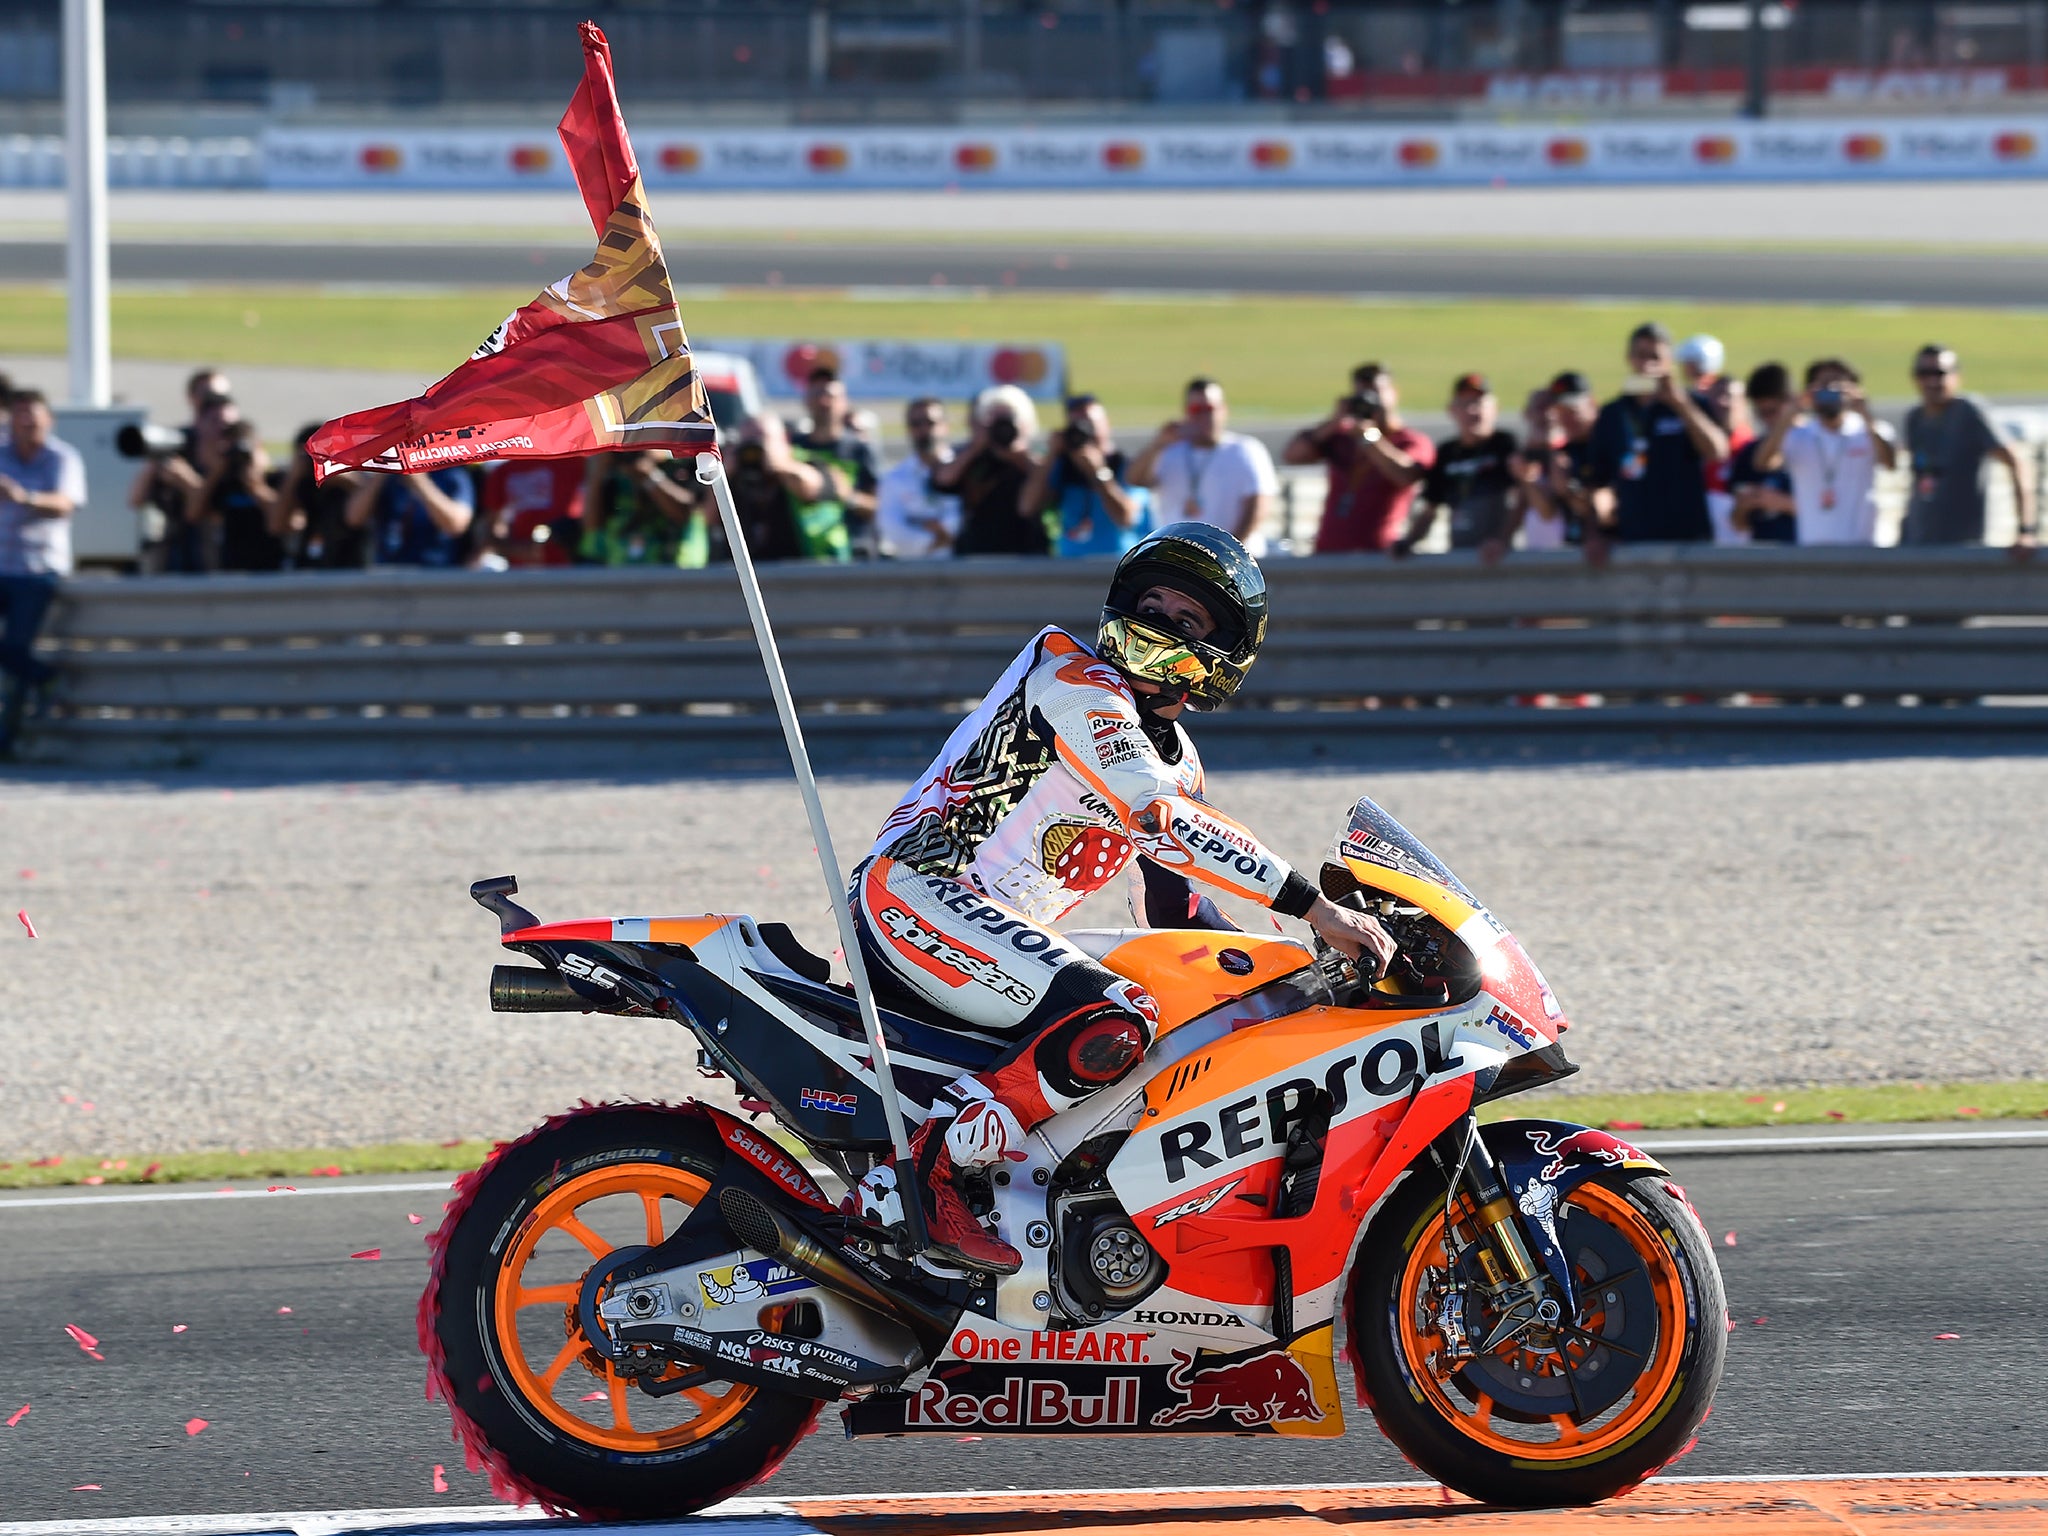 Marquez is now a six-time world champion in all classes